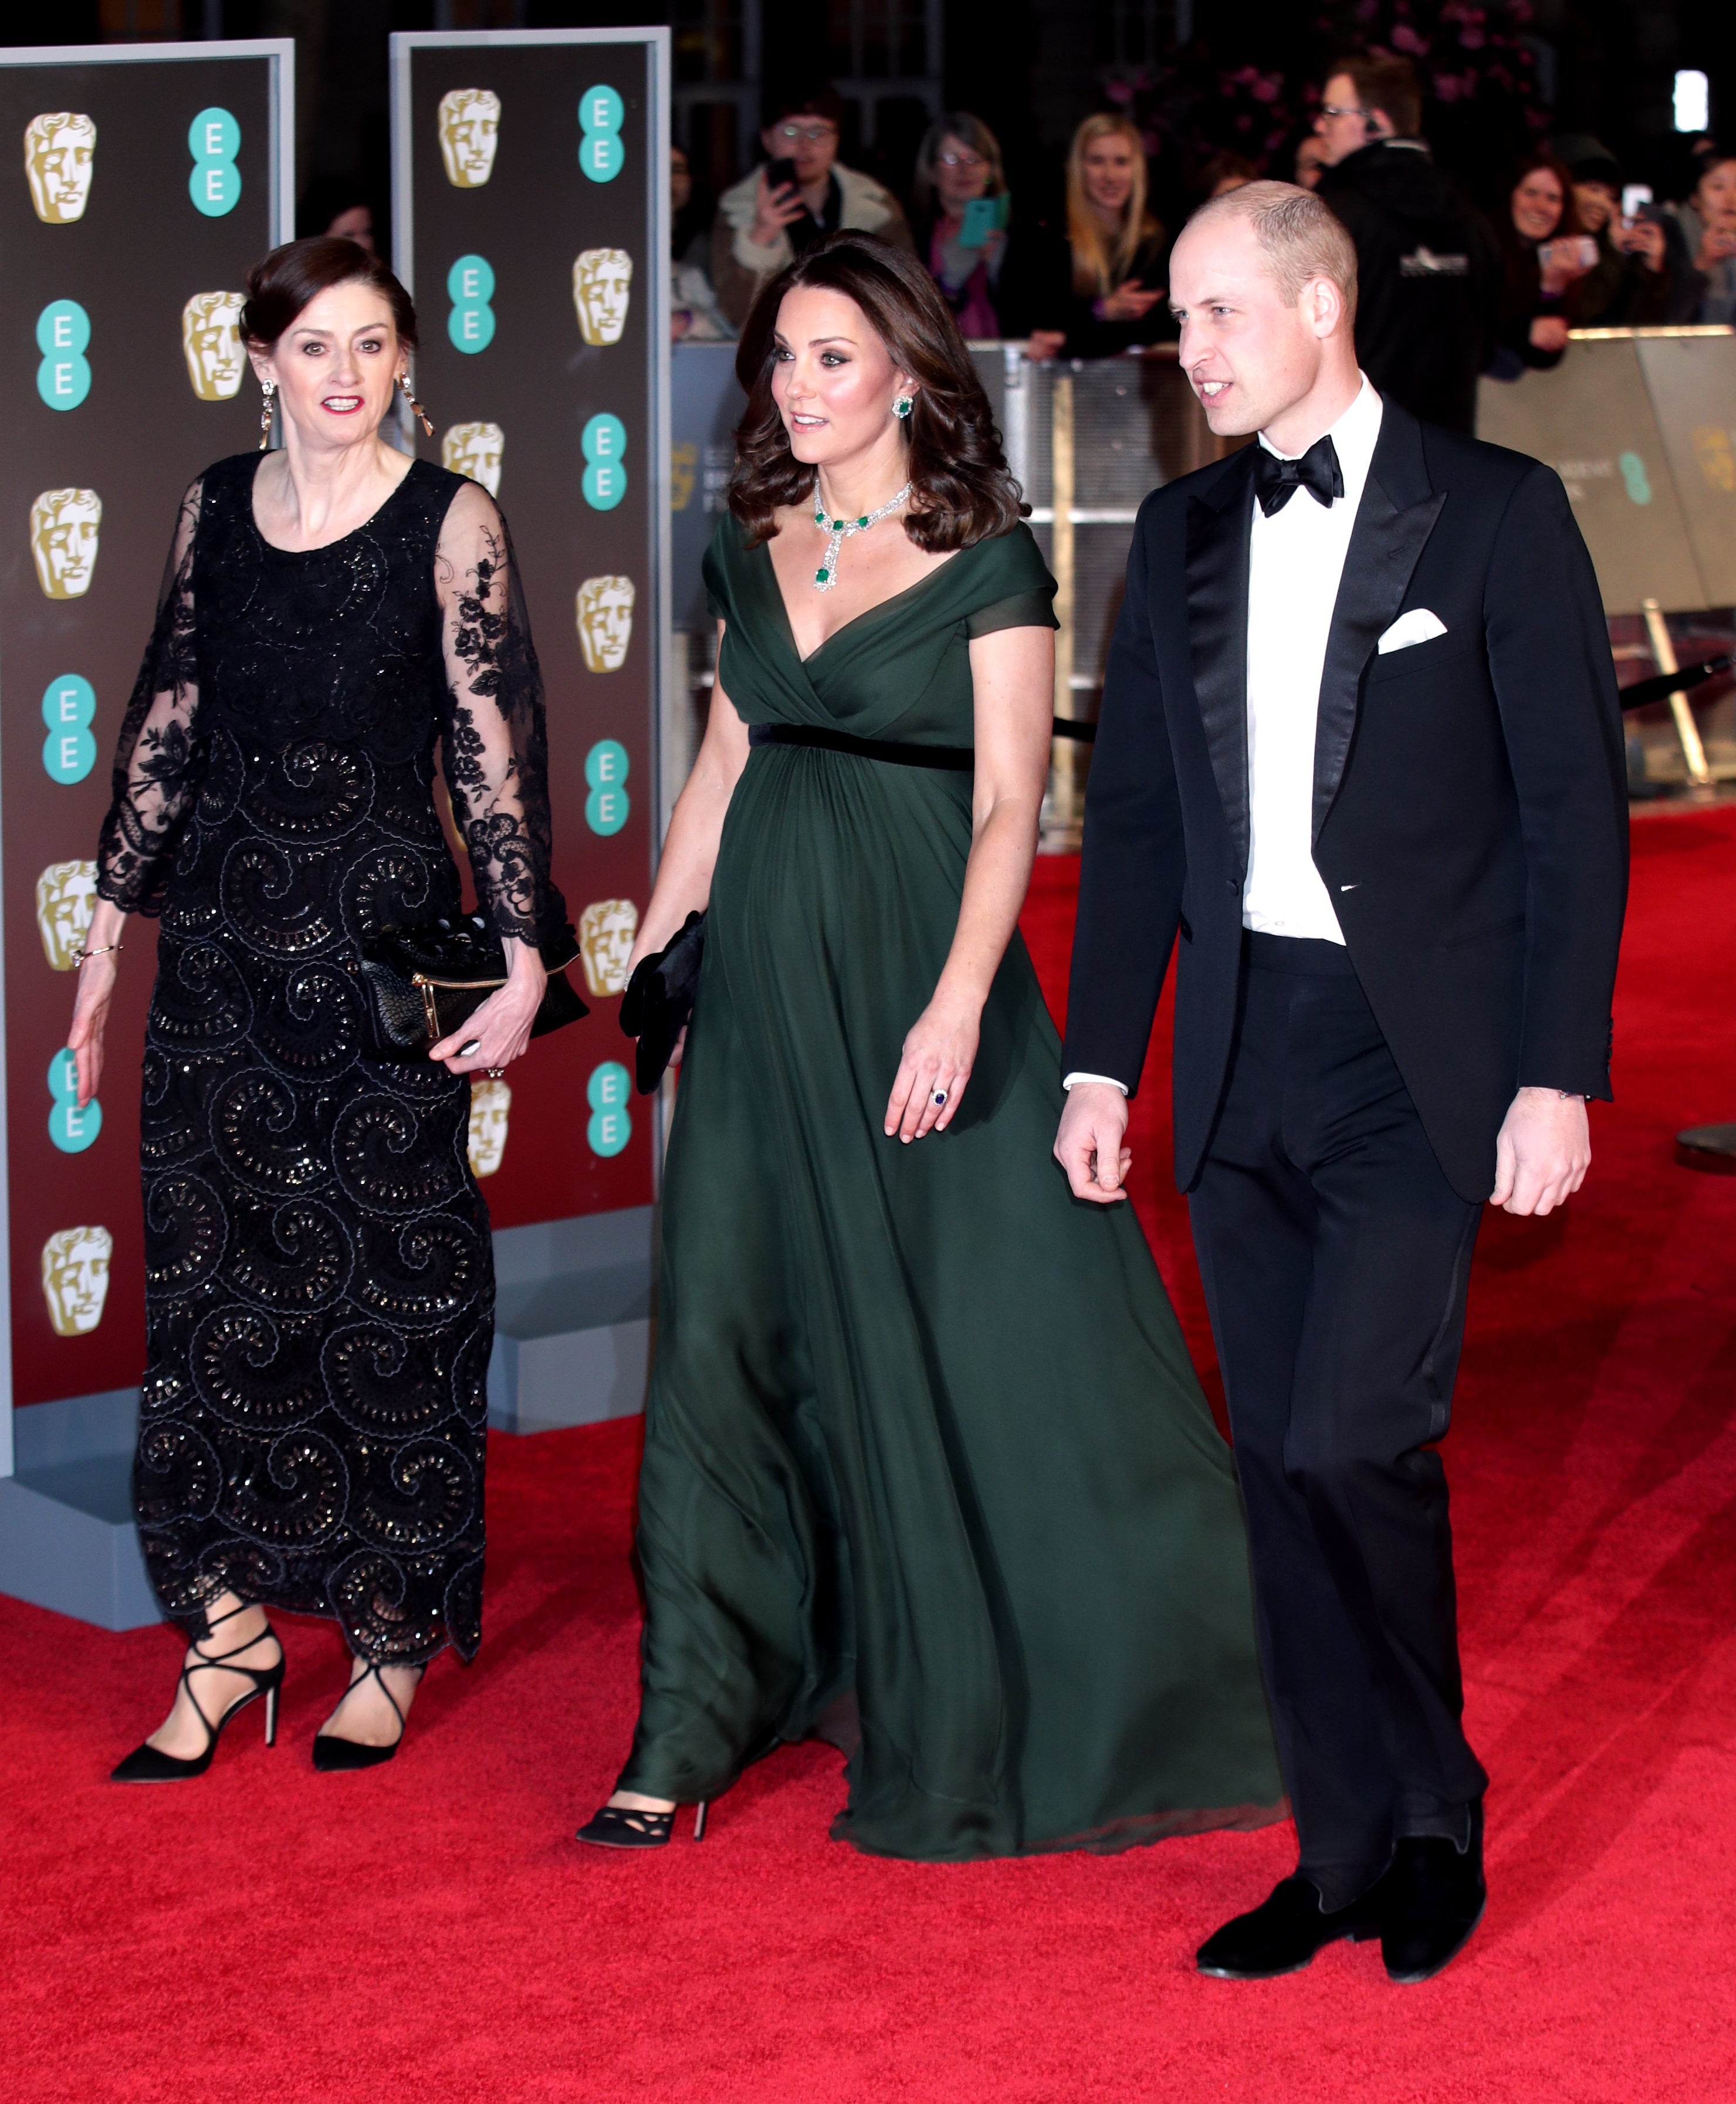 Amanda Berry with the Duke and Duchess of Cambridge at the Baftas in 2018 (Yui Mok/PA)